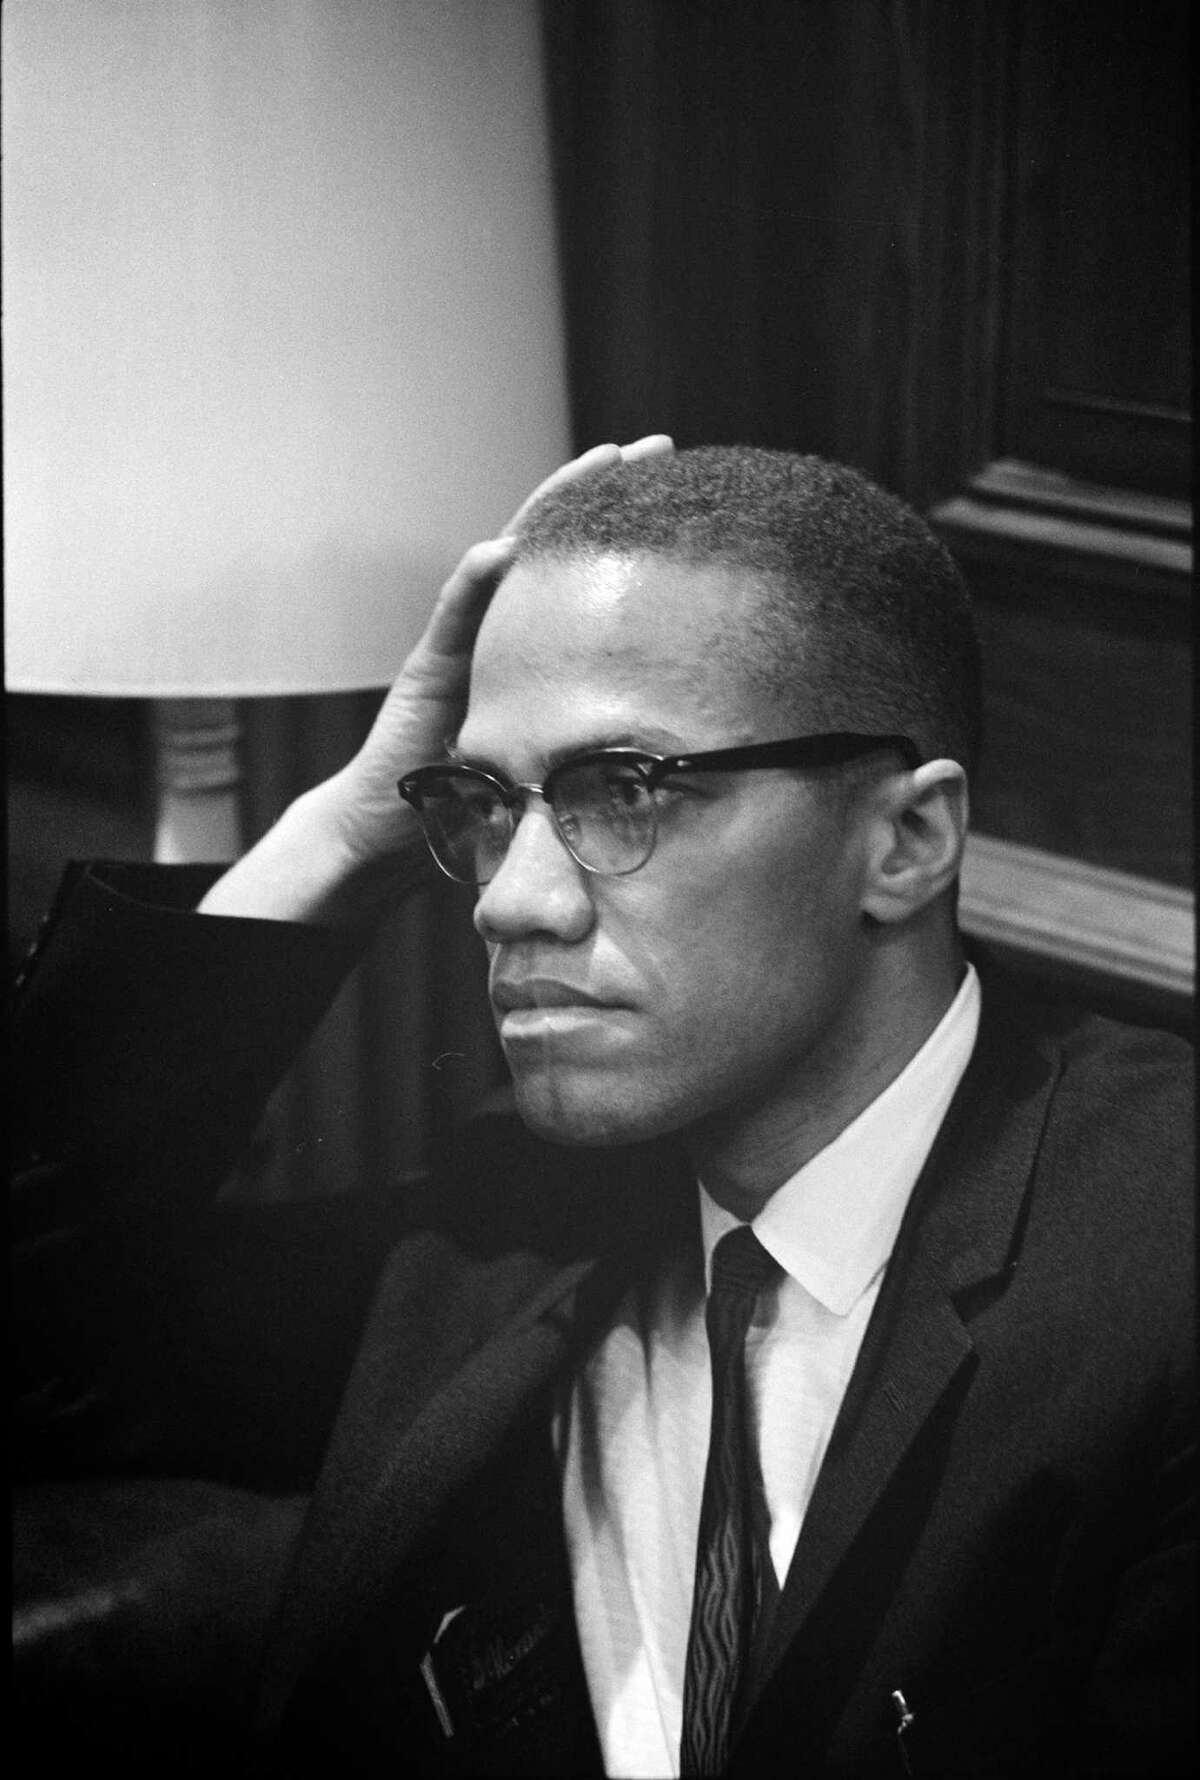 Malcolm X listens as Martin Luther King Jr. talks to reporters on March 26, 1964. They met only once, a grip-and-grin for cameras as they passed in a Capitol Hill hallway after observing a filibuster over the proposed Civil Rights Act. Over time, MalcolmÂ?’s respect for King increased. Illustrates MALCOLMX (category l), by Krissah Thompson Â 2015, The Washington Post. Moved Friday, Feb. 20, 2015. (MUST CREDIT: By Marion S. Trikosko, U.S. News & World Report Magazine Photograph Collection/ Library of Congress Prints and Photographs Division)